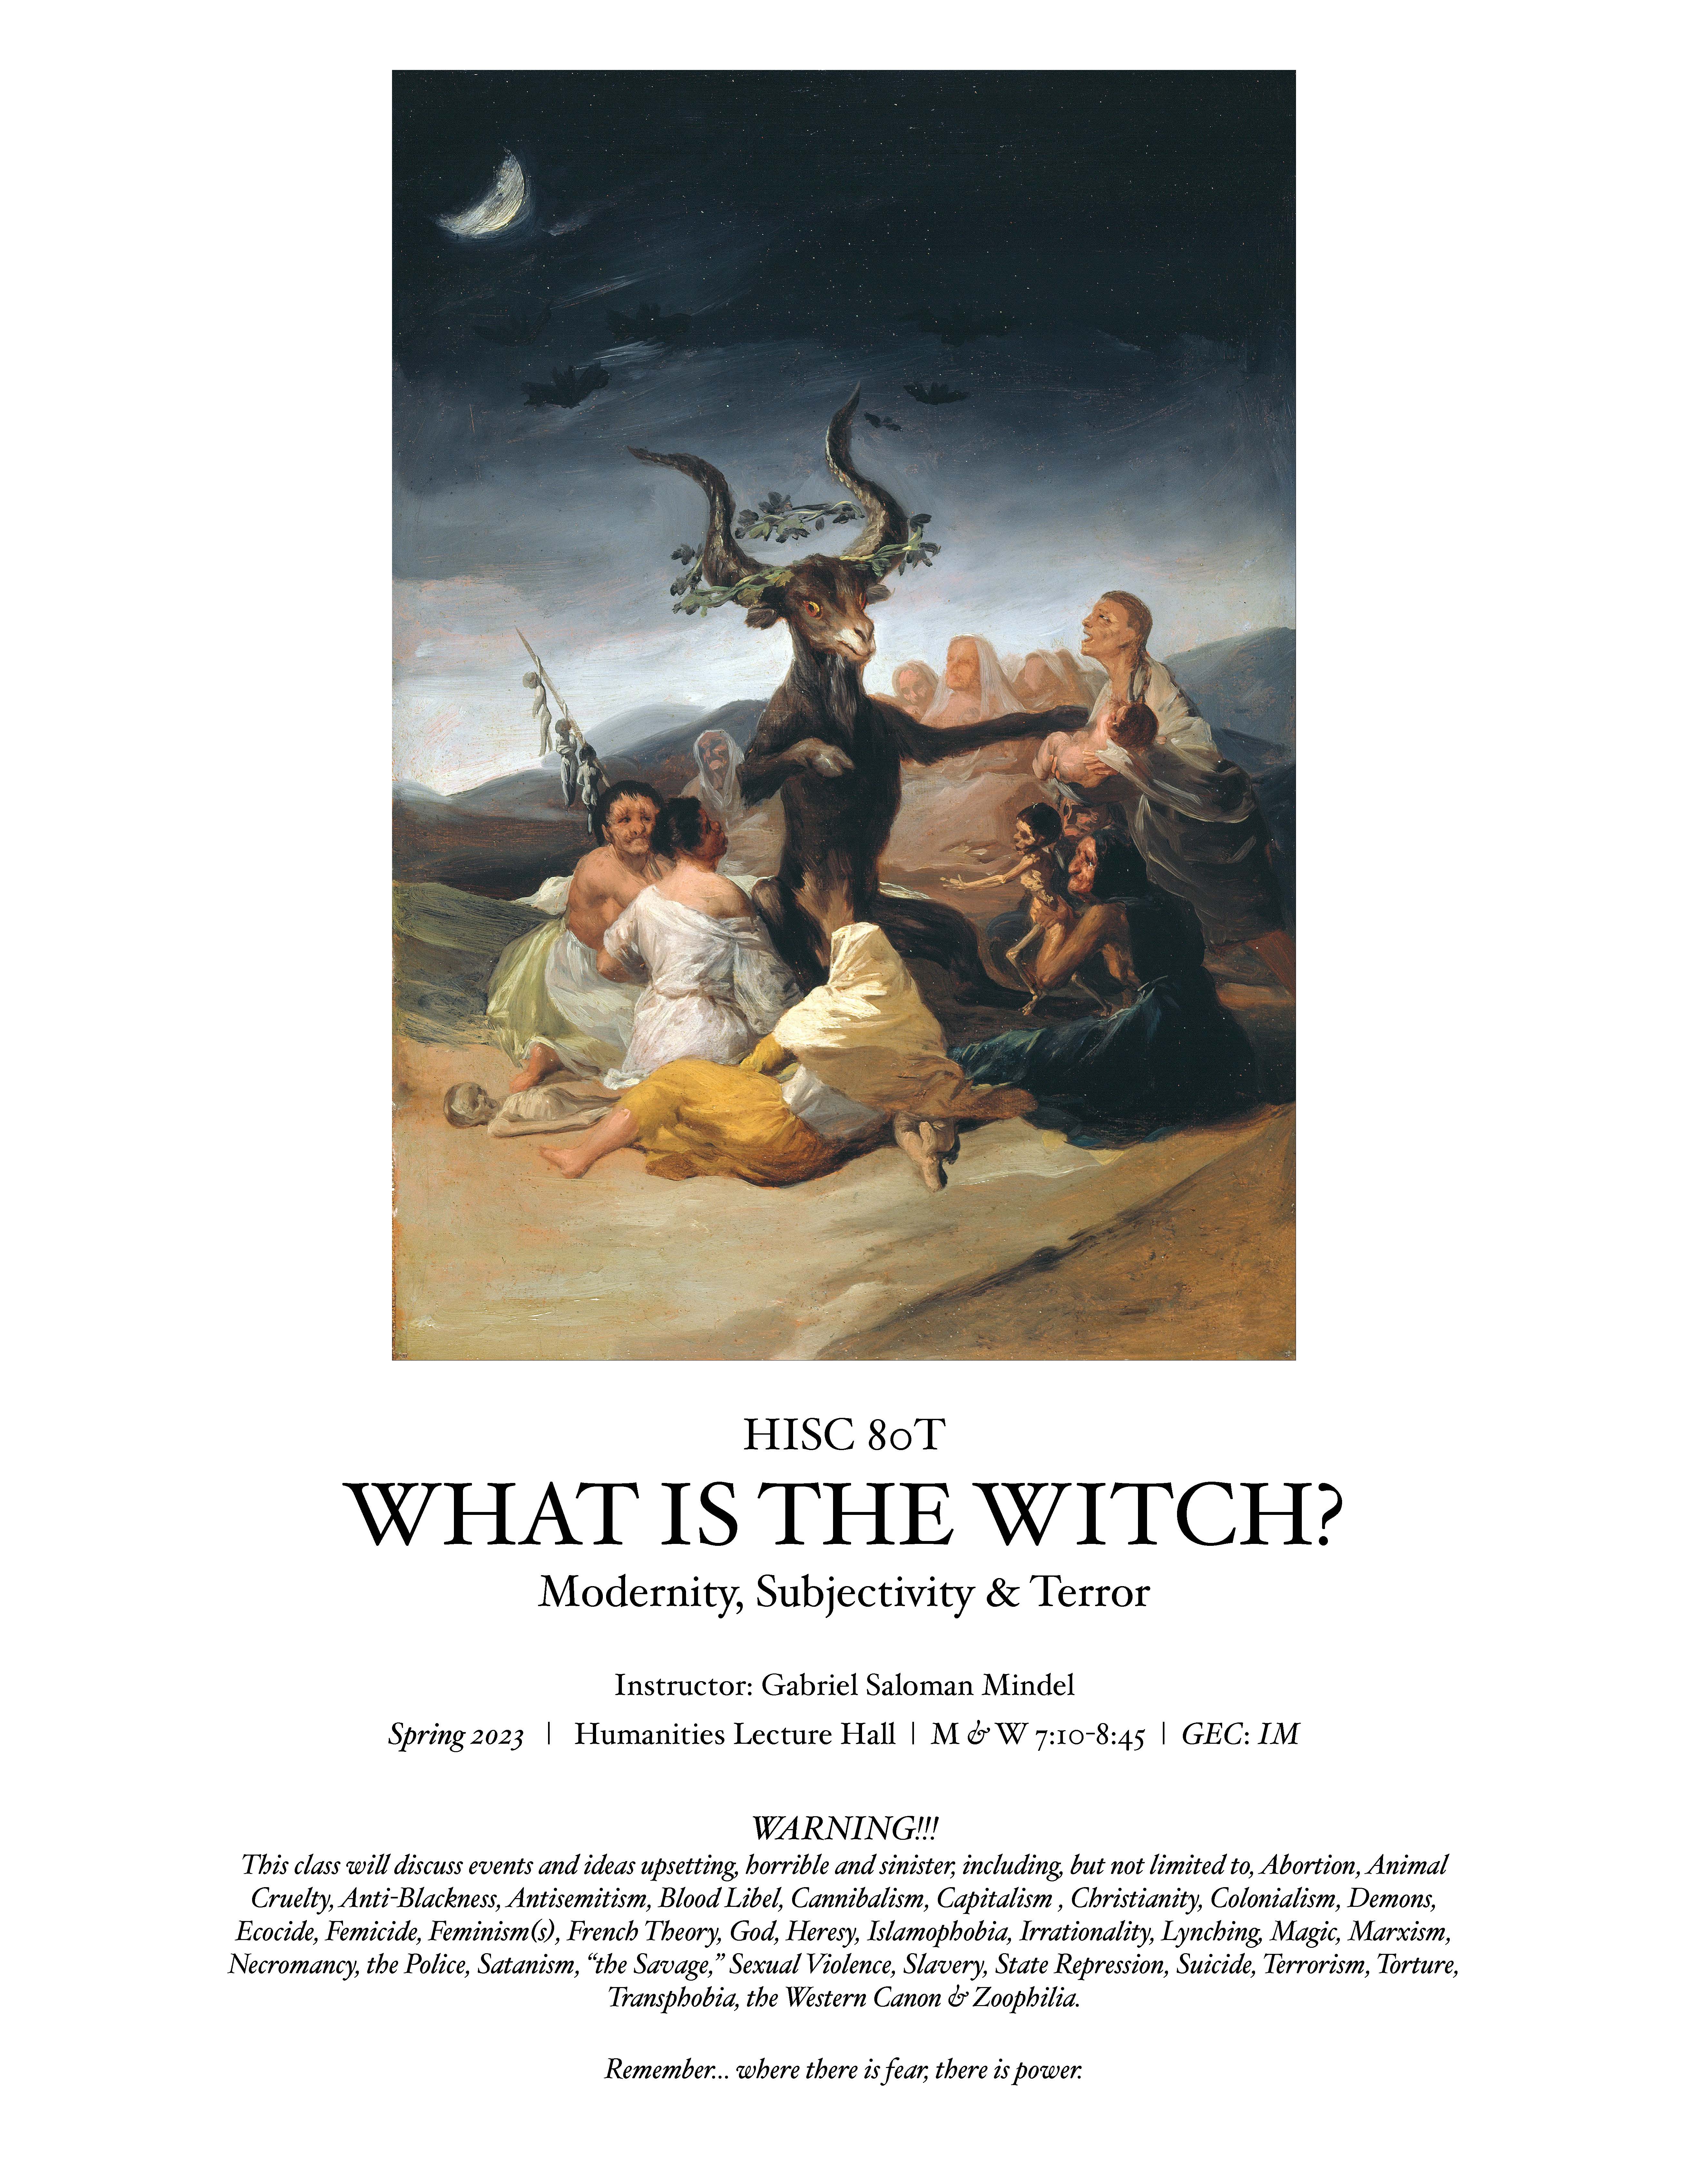 HISC 80T Flyer: What is the Witch?